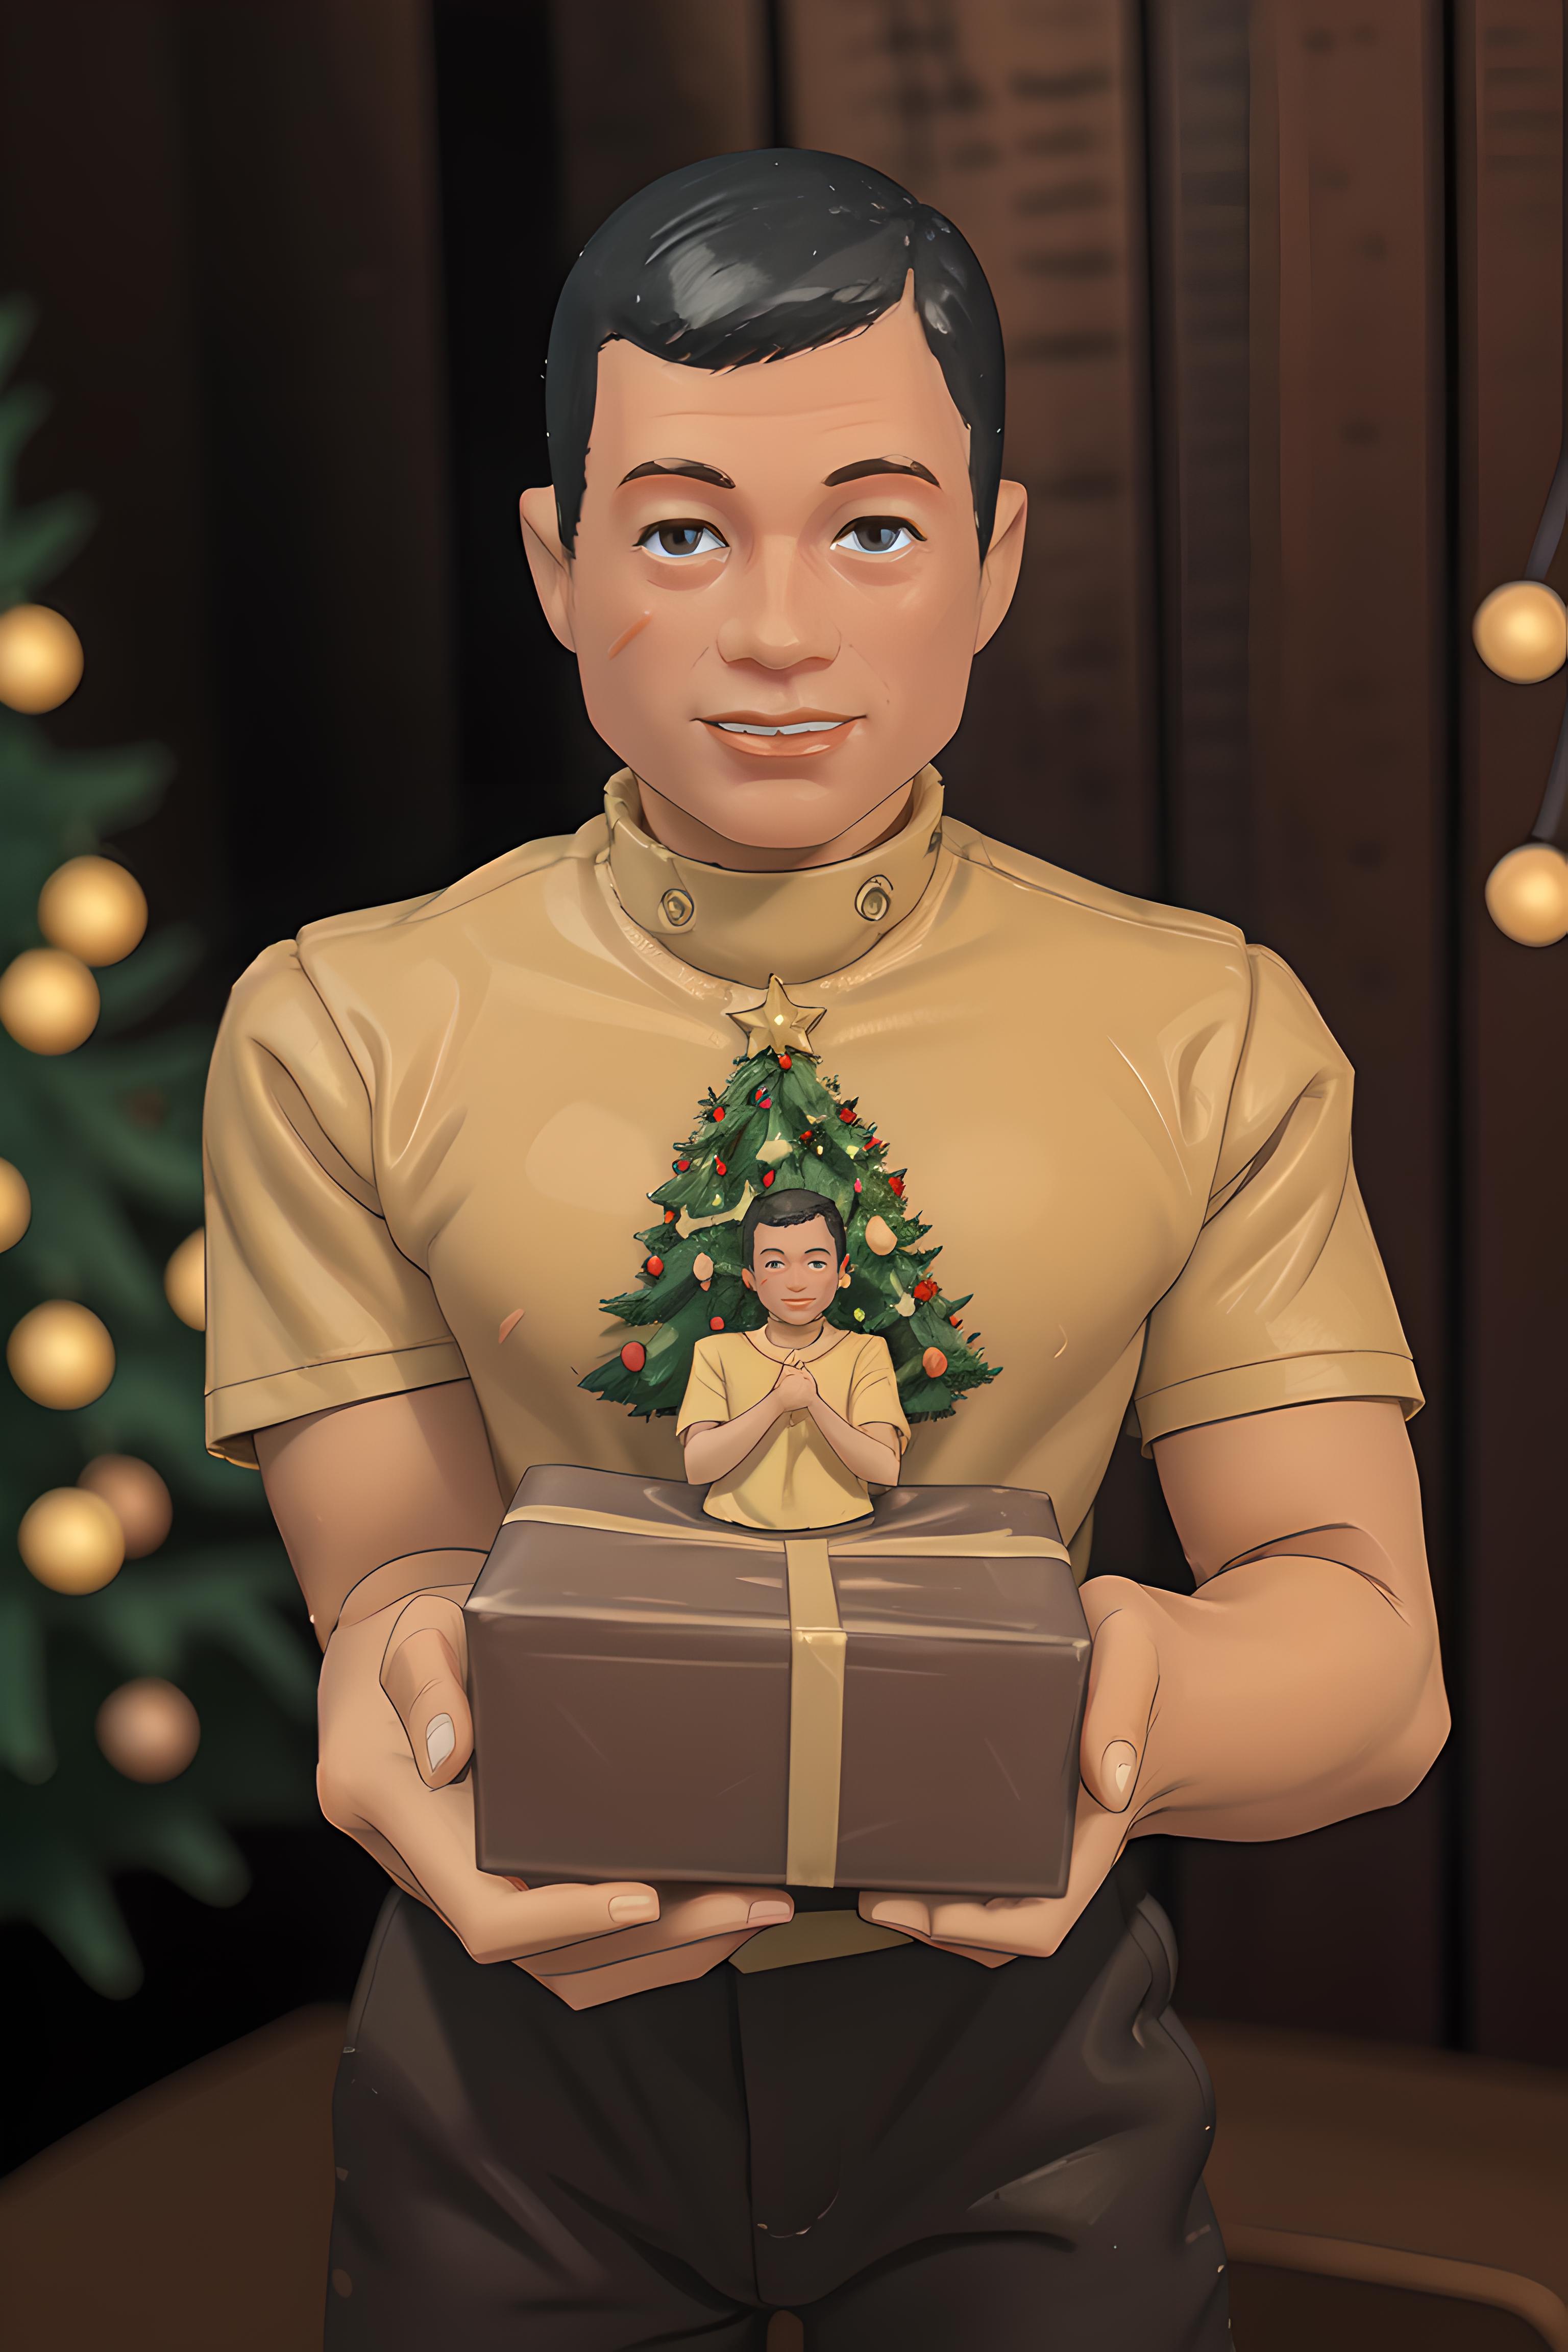 Man holding a box with a Christmas tree inside, wearing a yellow shirt.